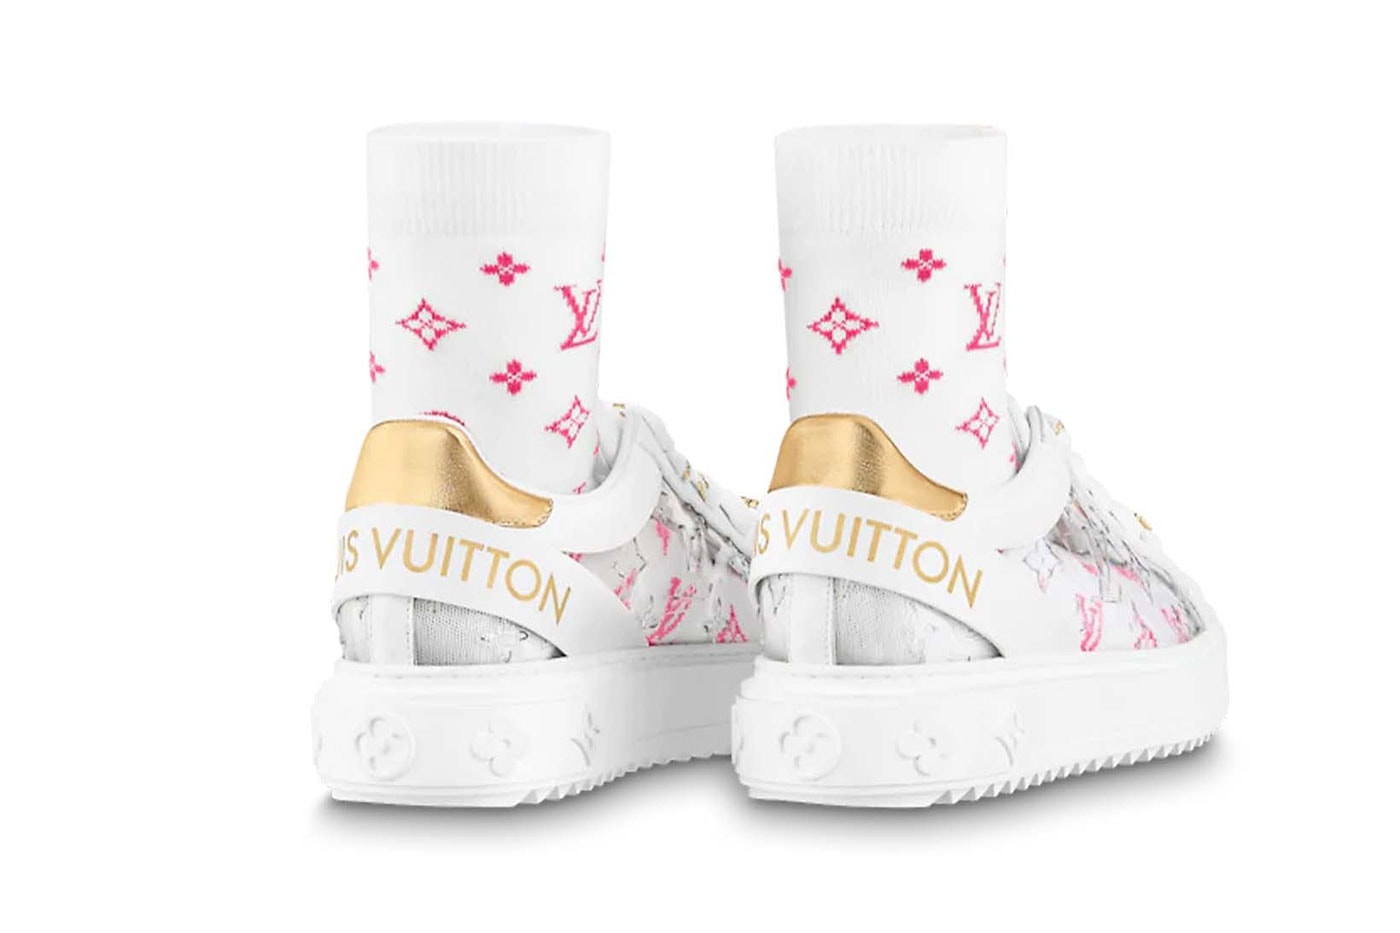 Louis Vuitton Time Out Sneaker Gold. Size 38.0